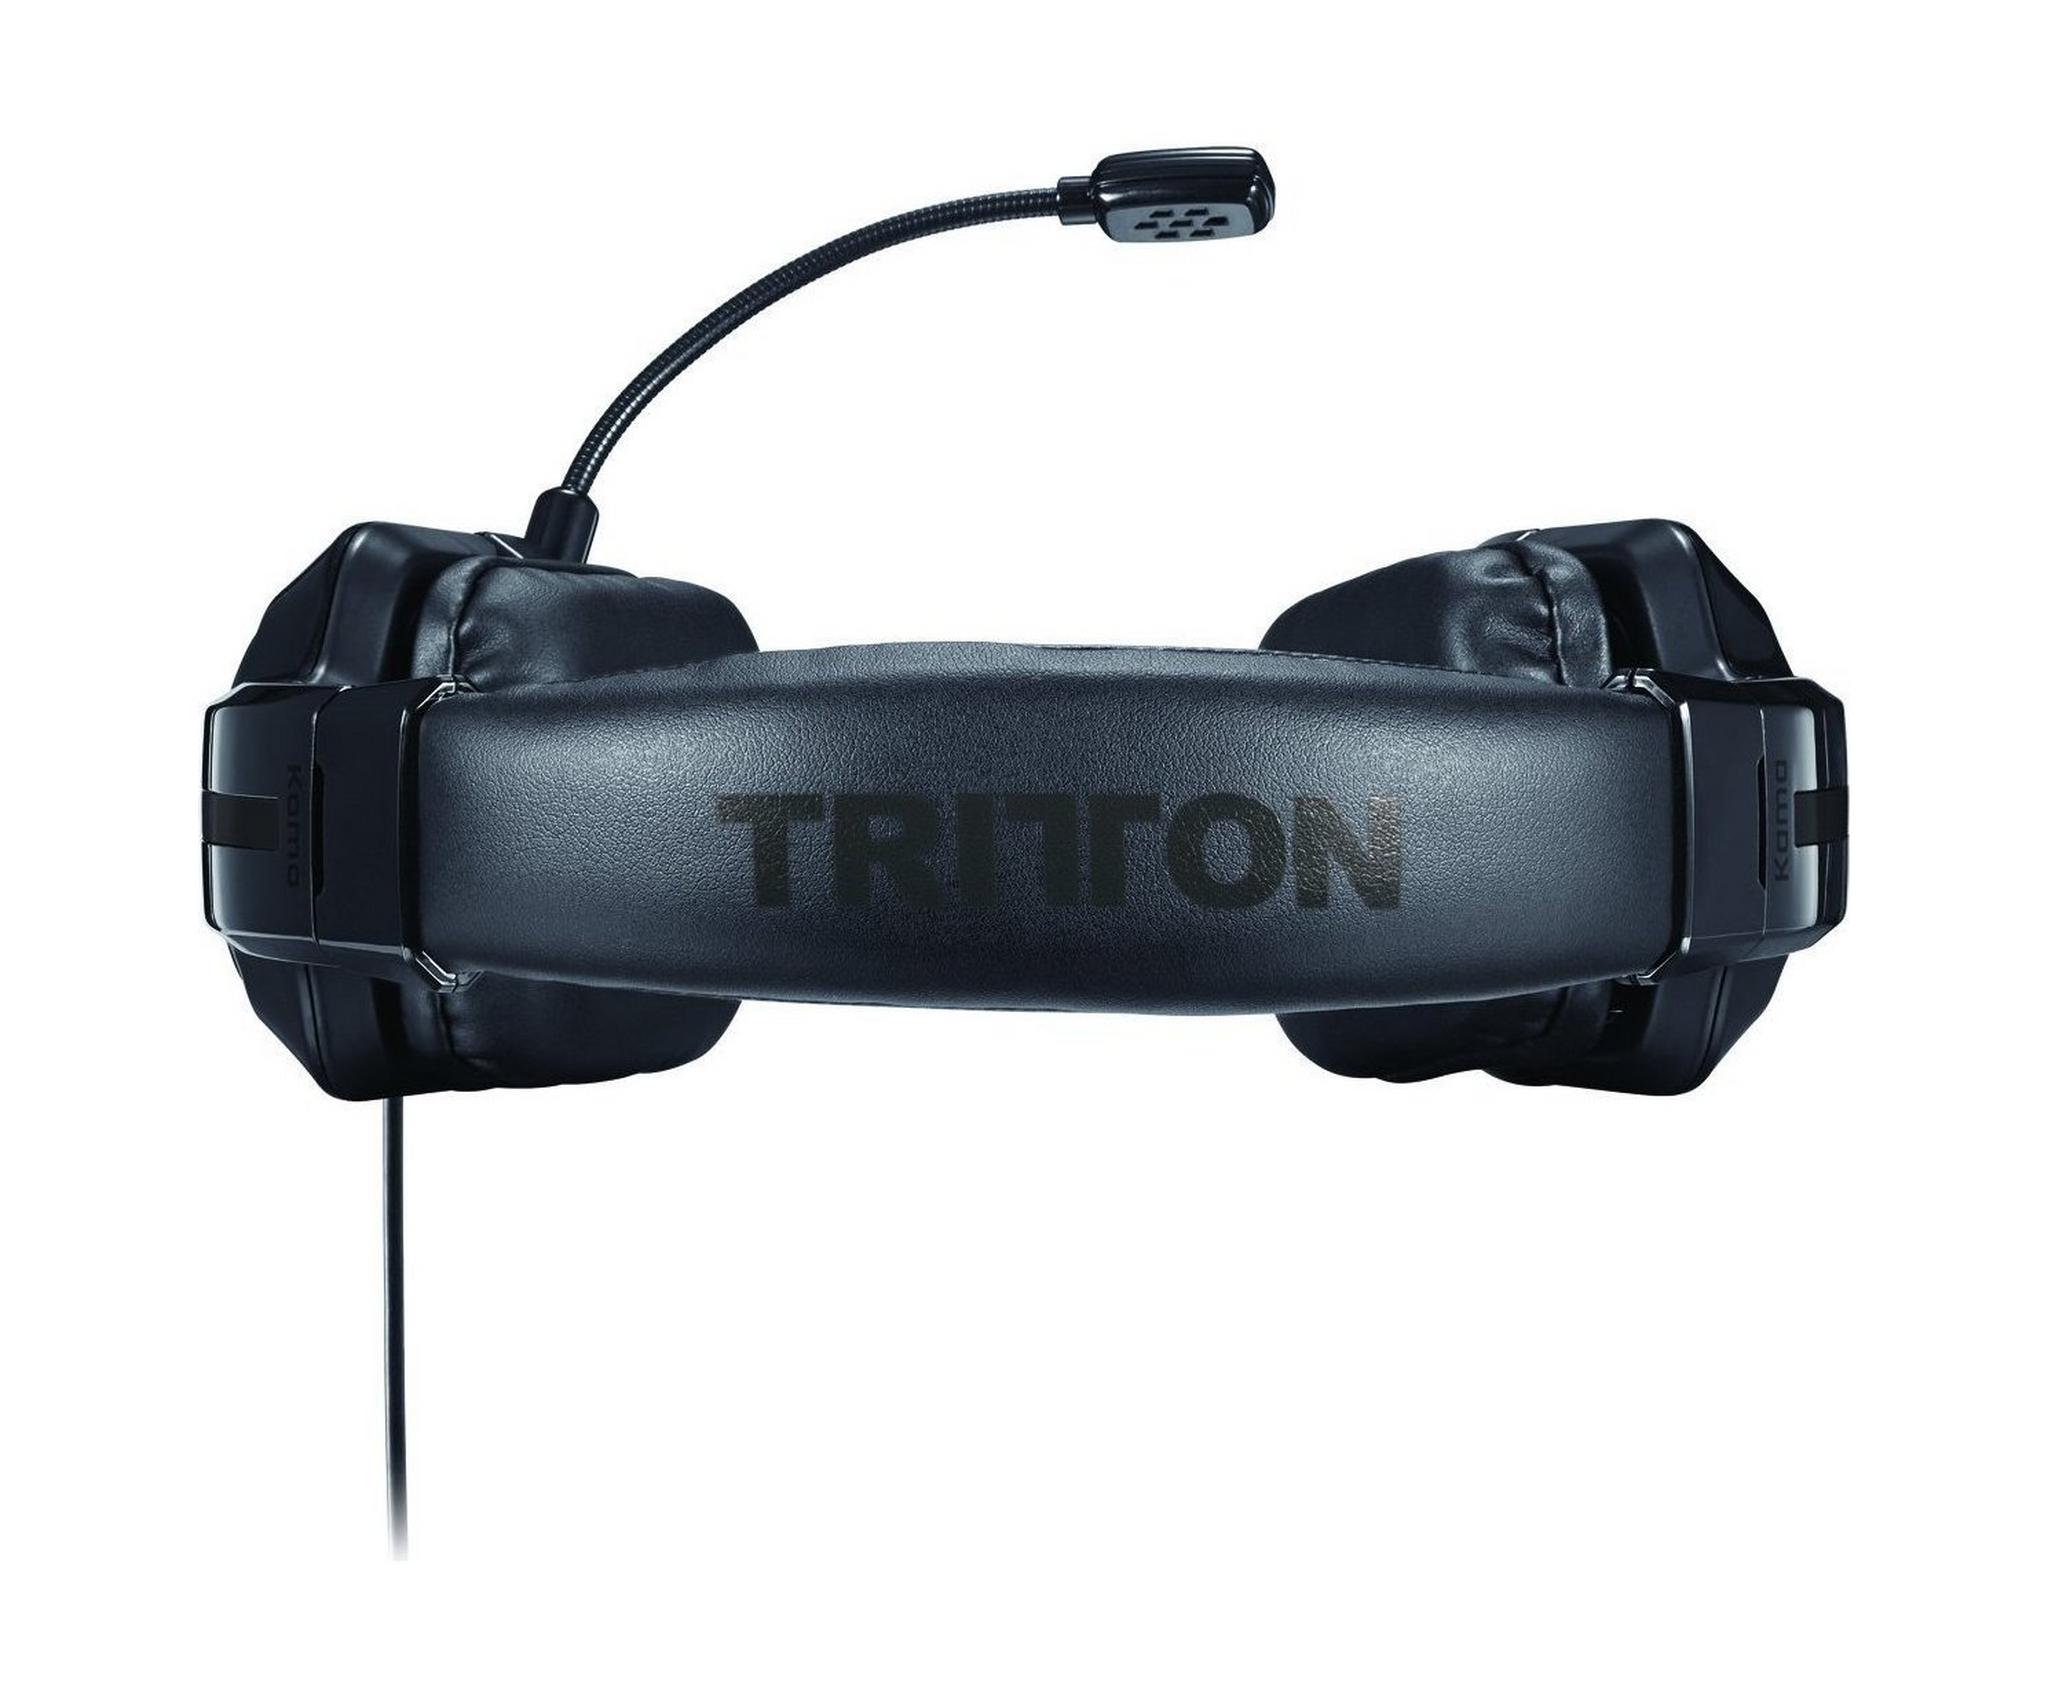 Tritton Kama Stereo Headset for Xbox One and Mobile Devices